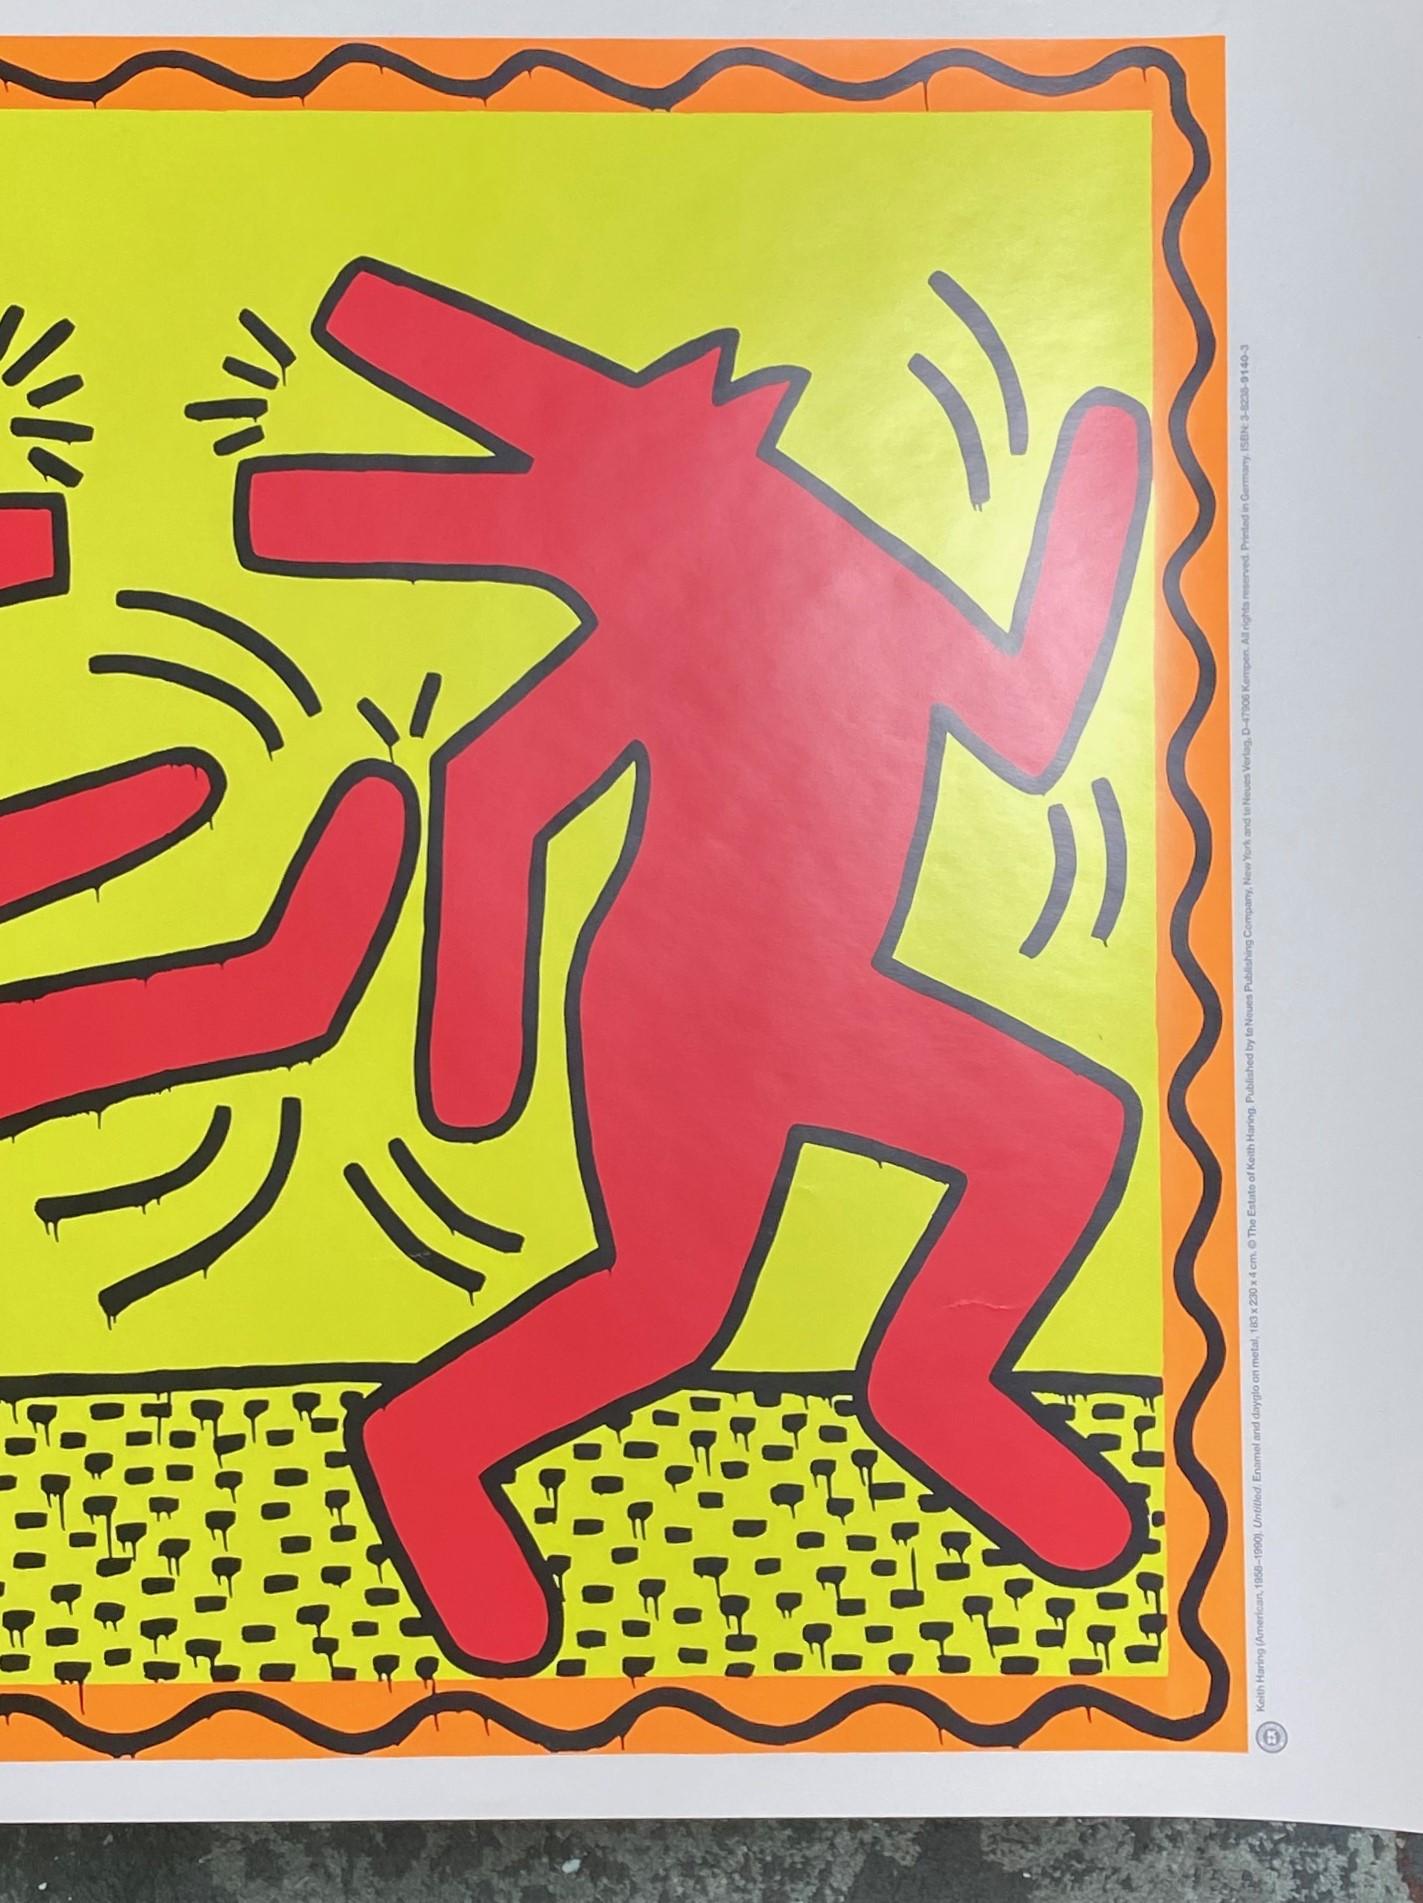 American Keith Haring Vintage NYC Pop Shop Art Lithograph Poster Dancing Dogs Wolves 1991 For Sale